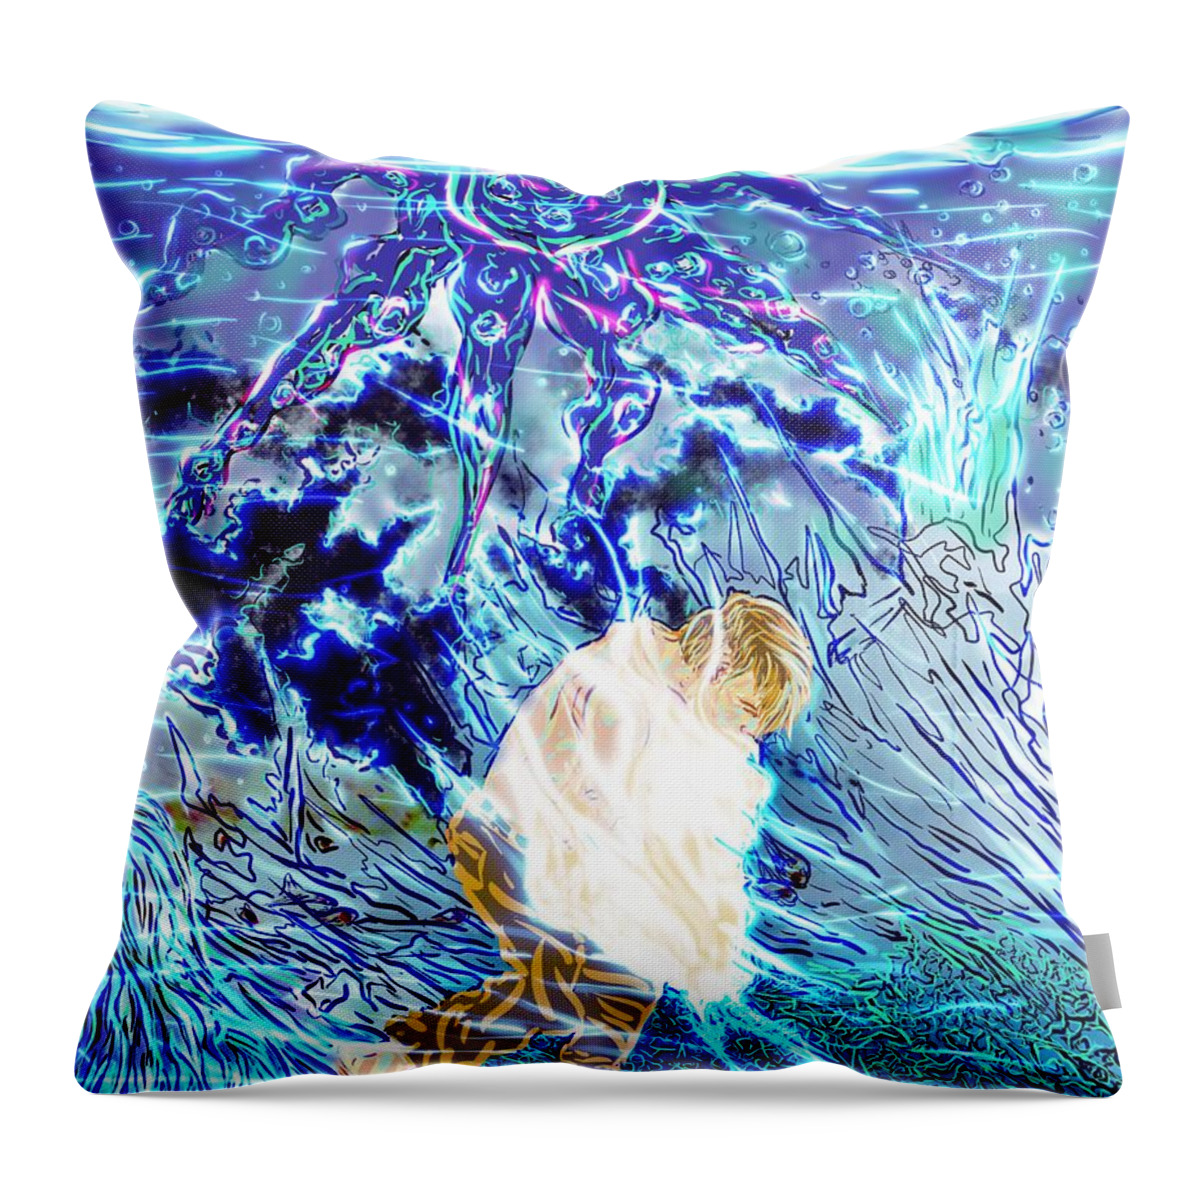 Digital Art Throw Pillow featuring the digital art Life Forces by Angela Weddle